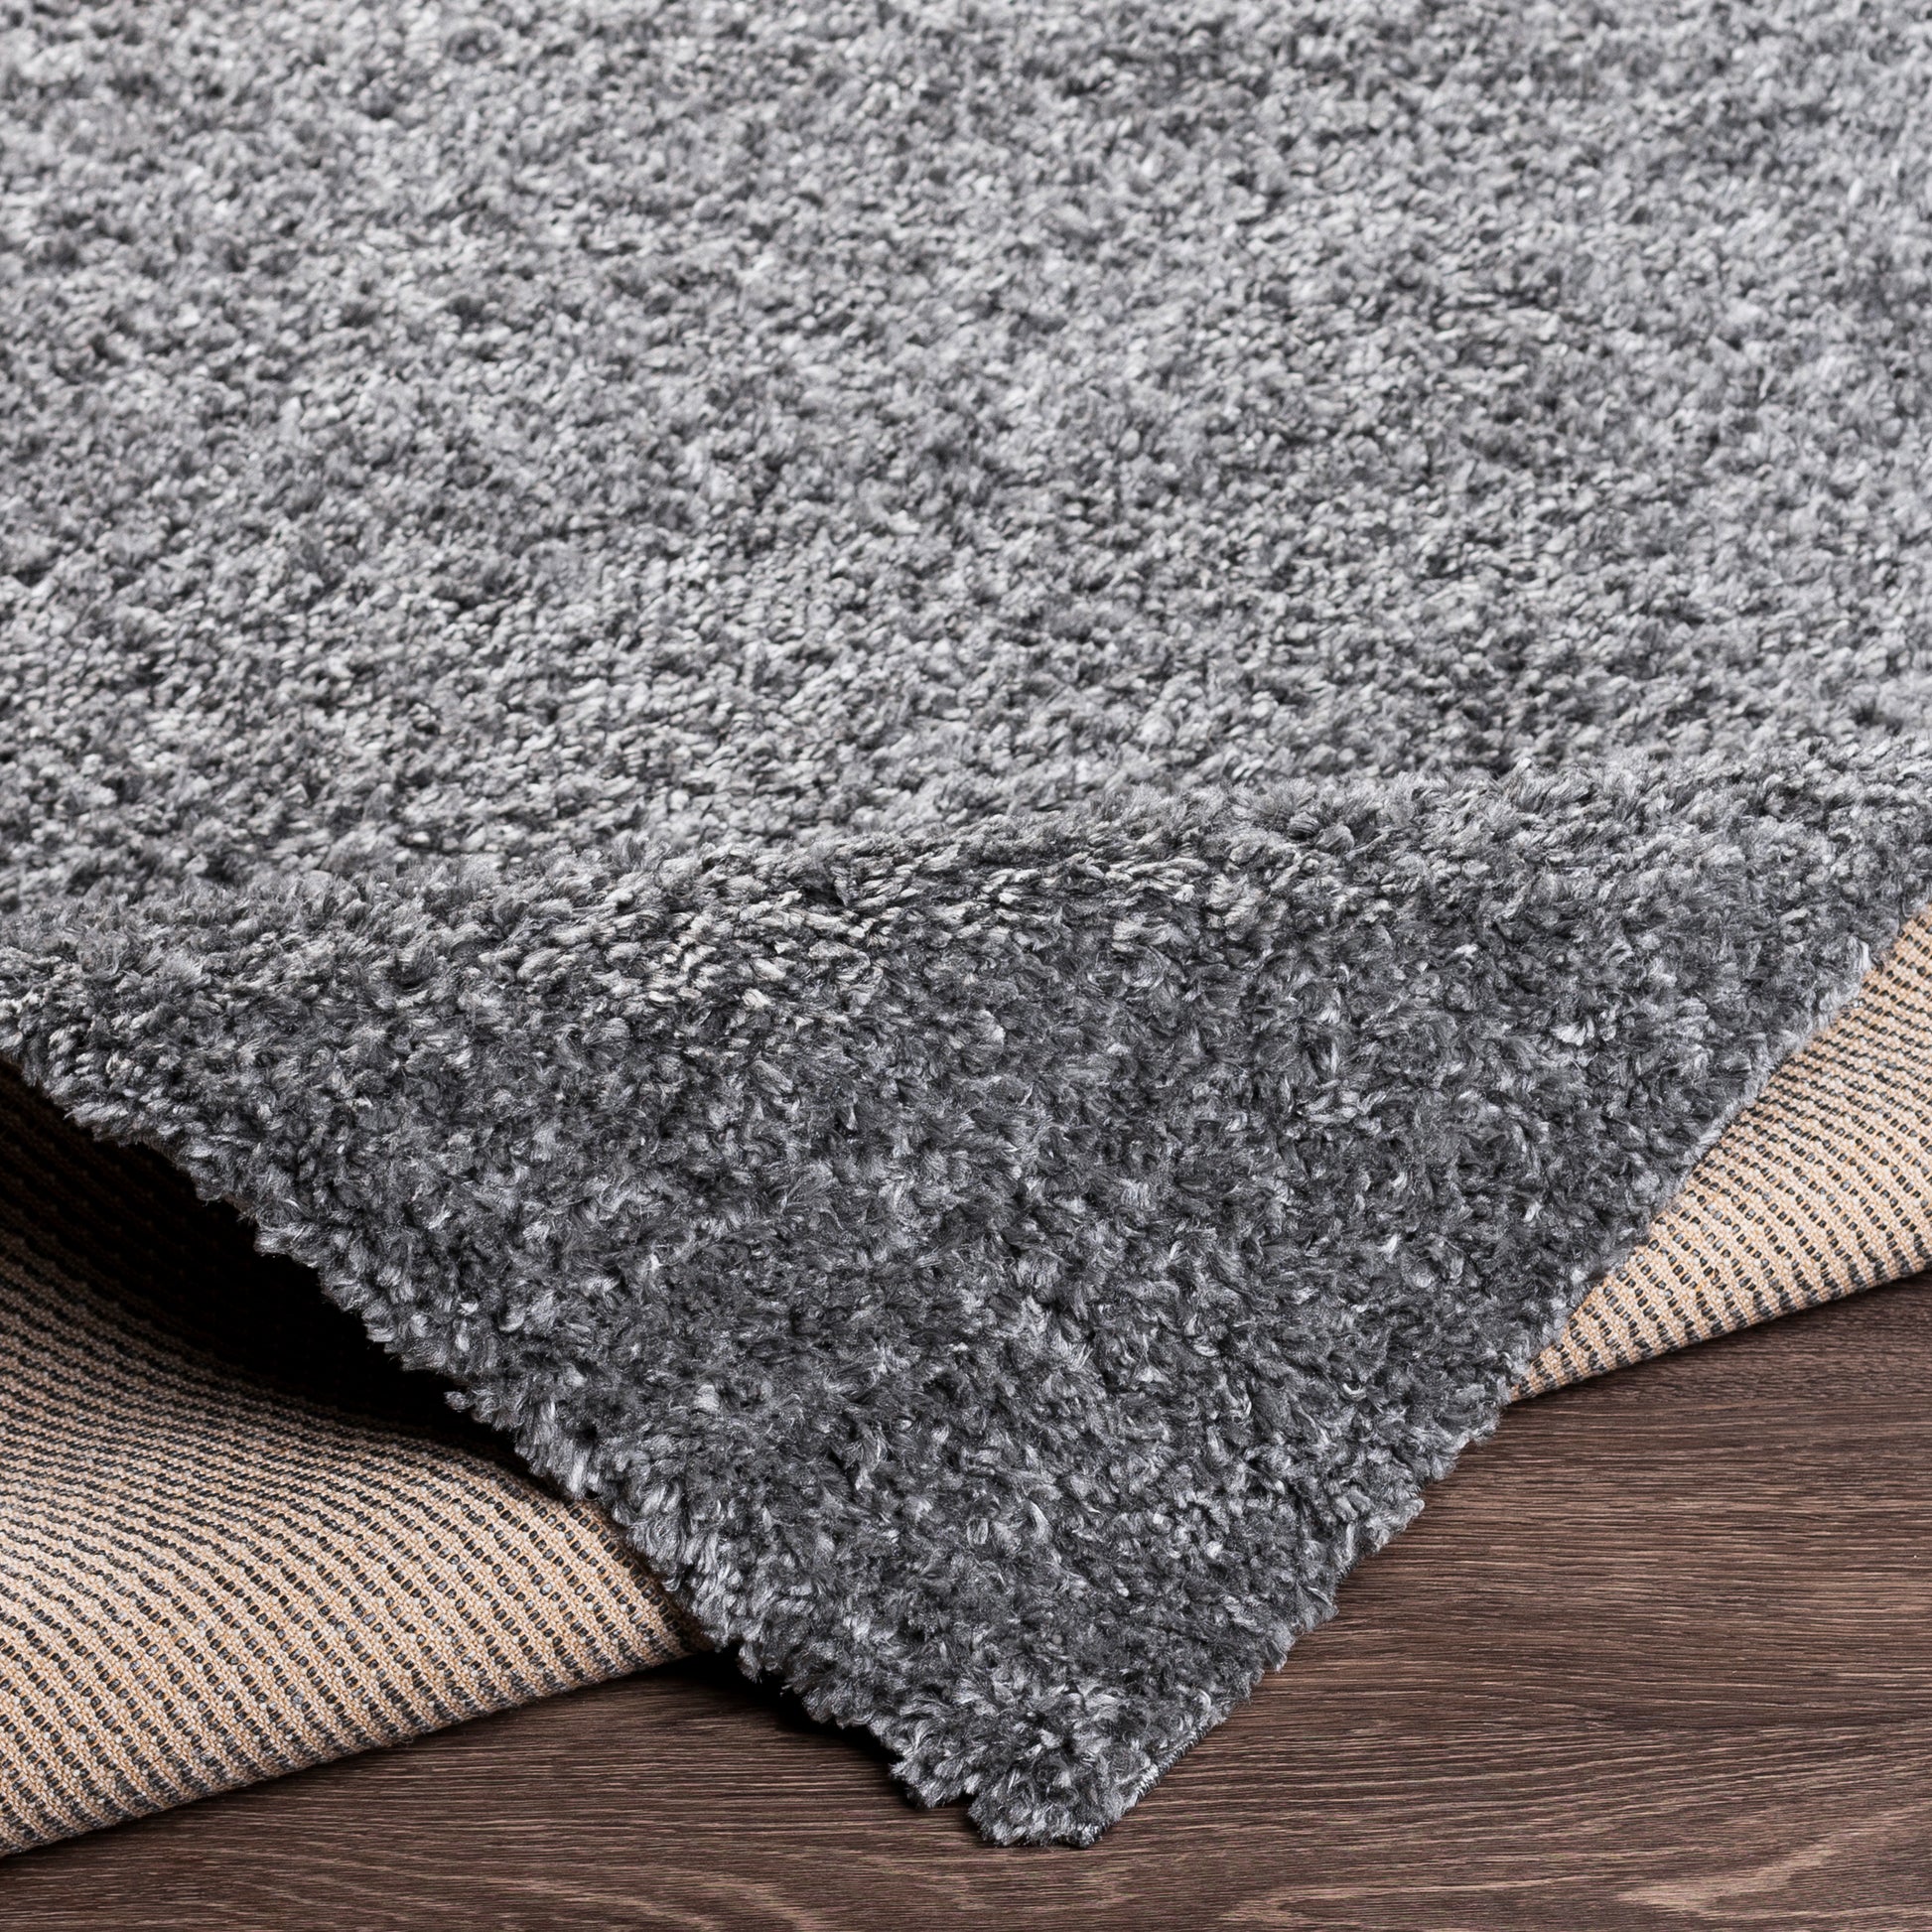 Surya Deluxe Shag Dxs-2303 Charcoal Area Rug